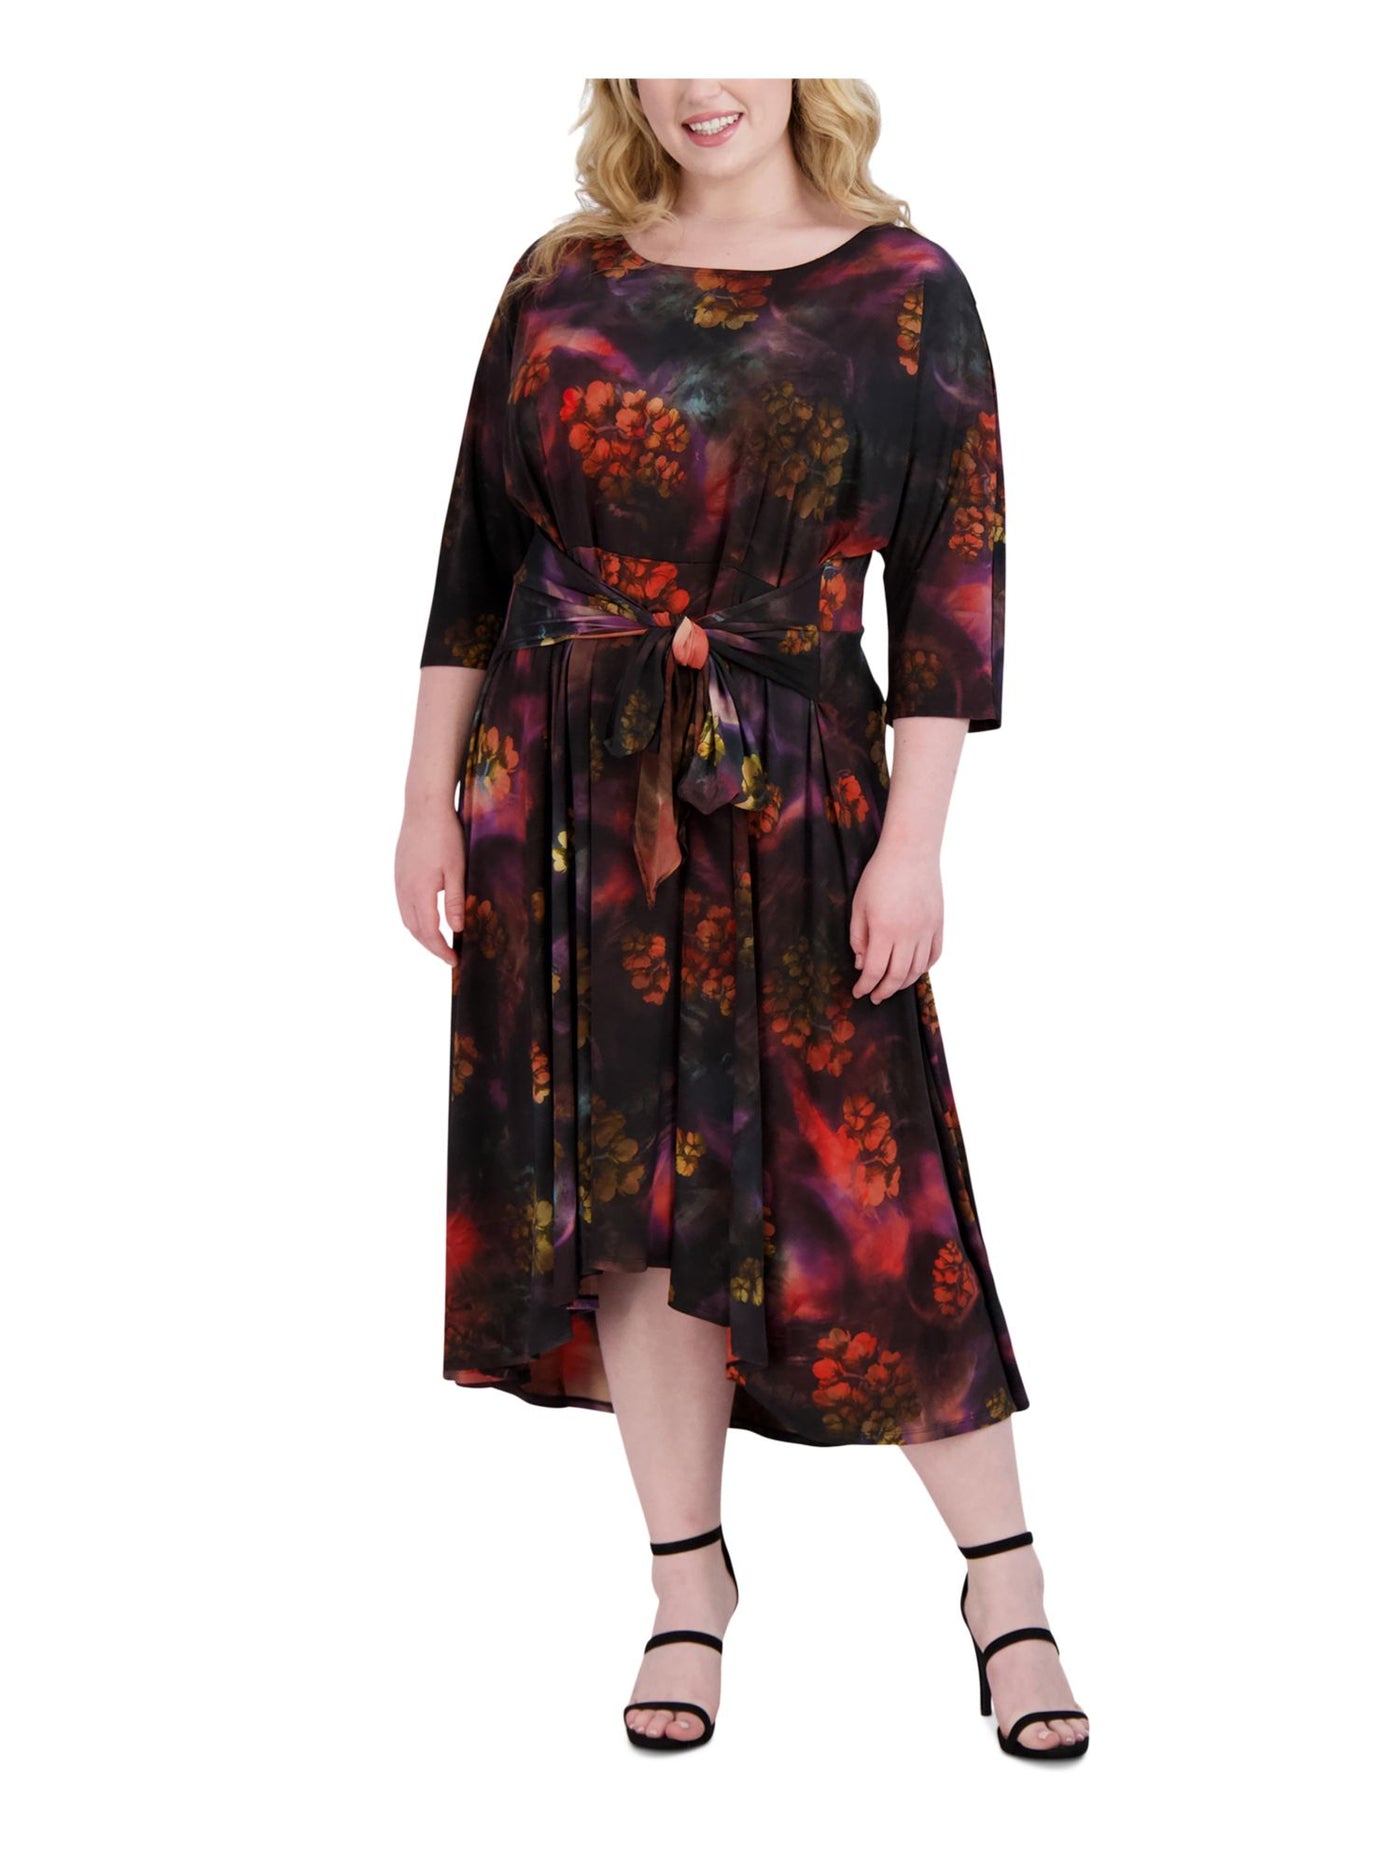 SIGNATURE BY ROBBIE BEE Womens Black Unlined Tie Front Hi-lo Hem Floral 3/4 Sleeve Scoop Neck Tea-Length Wear To Work Fit + Flare Dress Plus 1X